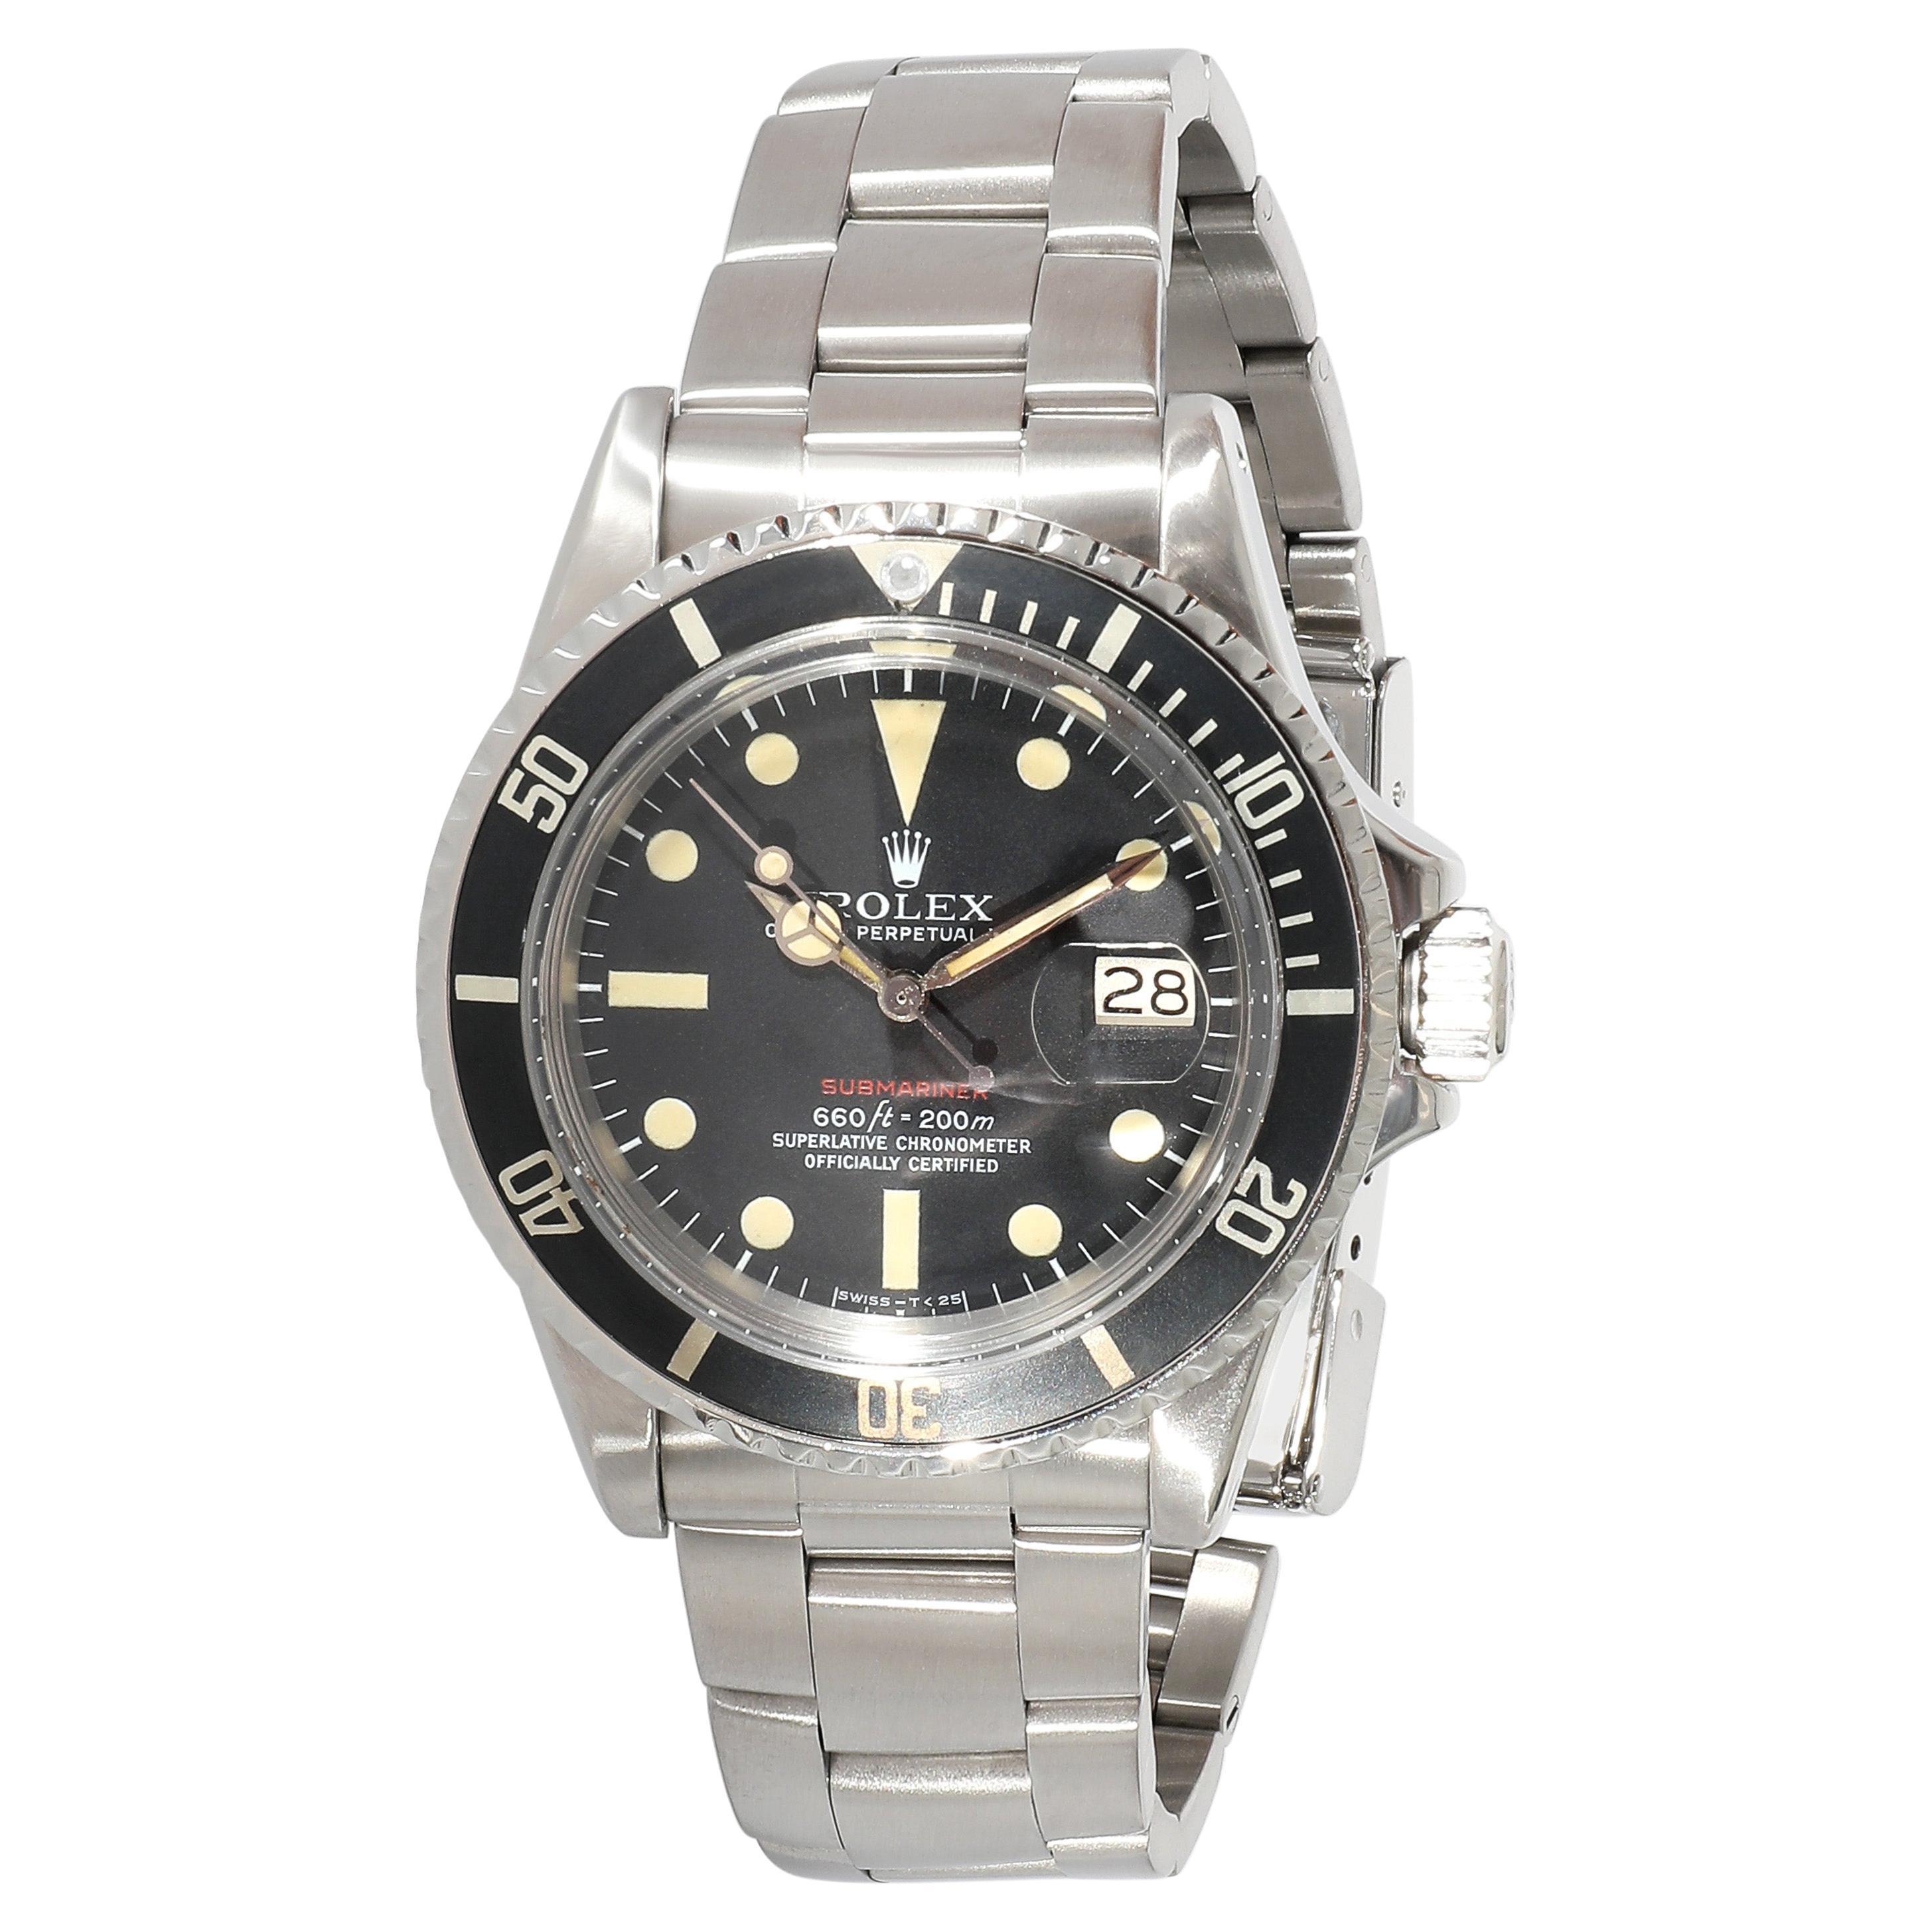 Rolex Submariner 1680 Men's Watch in  Stainless Steel For Sale